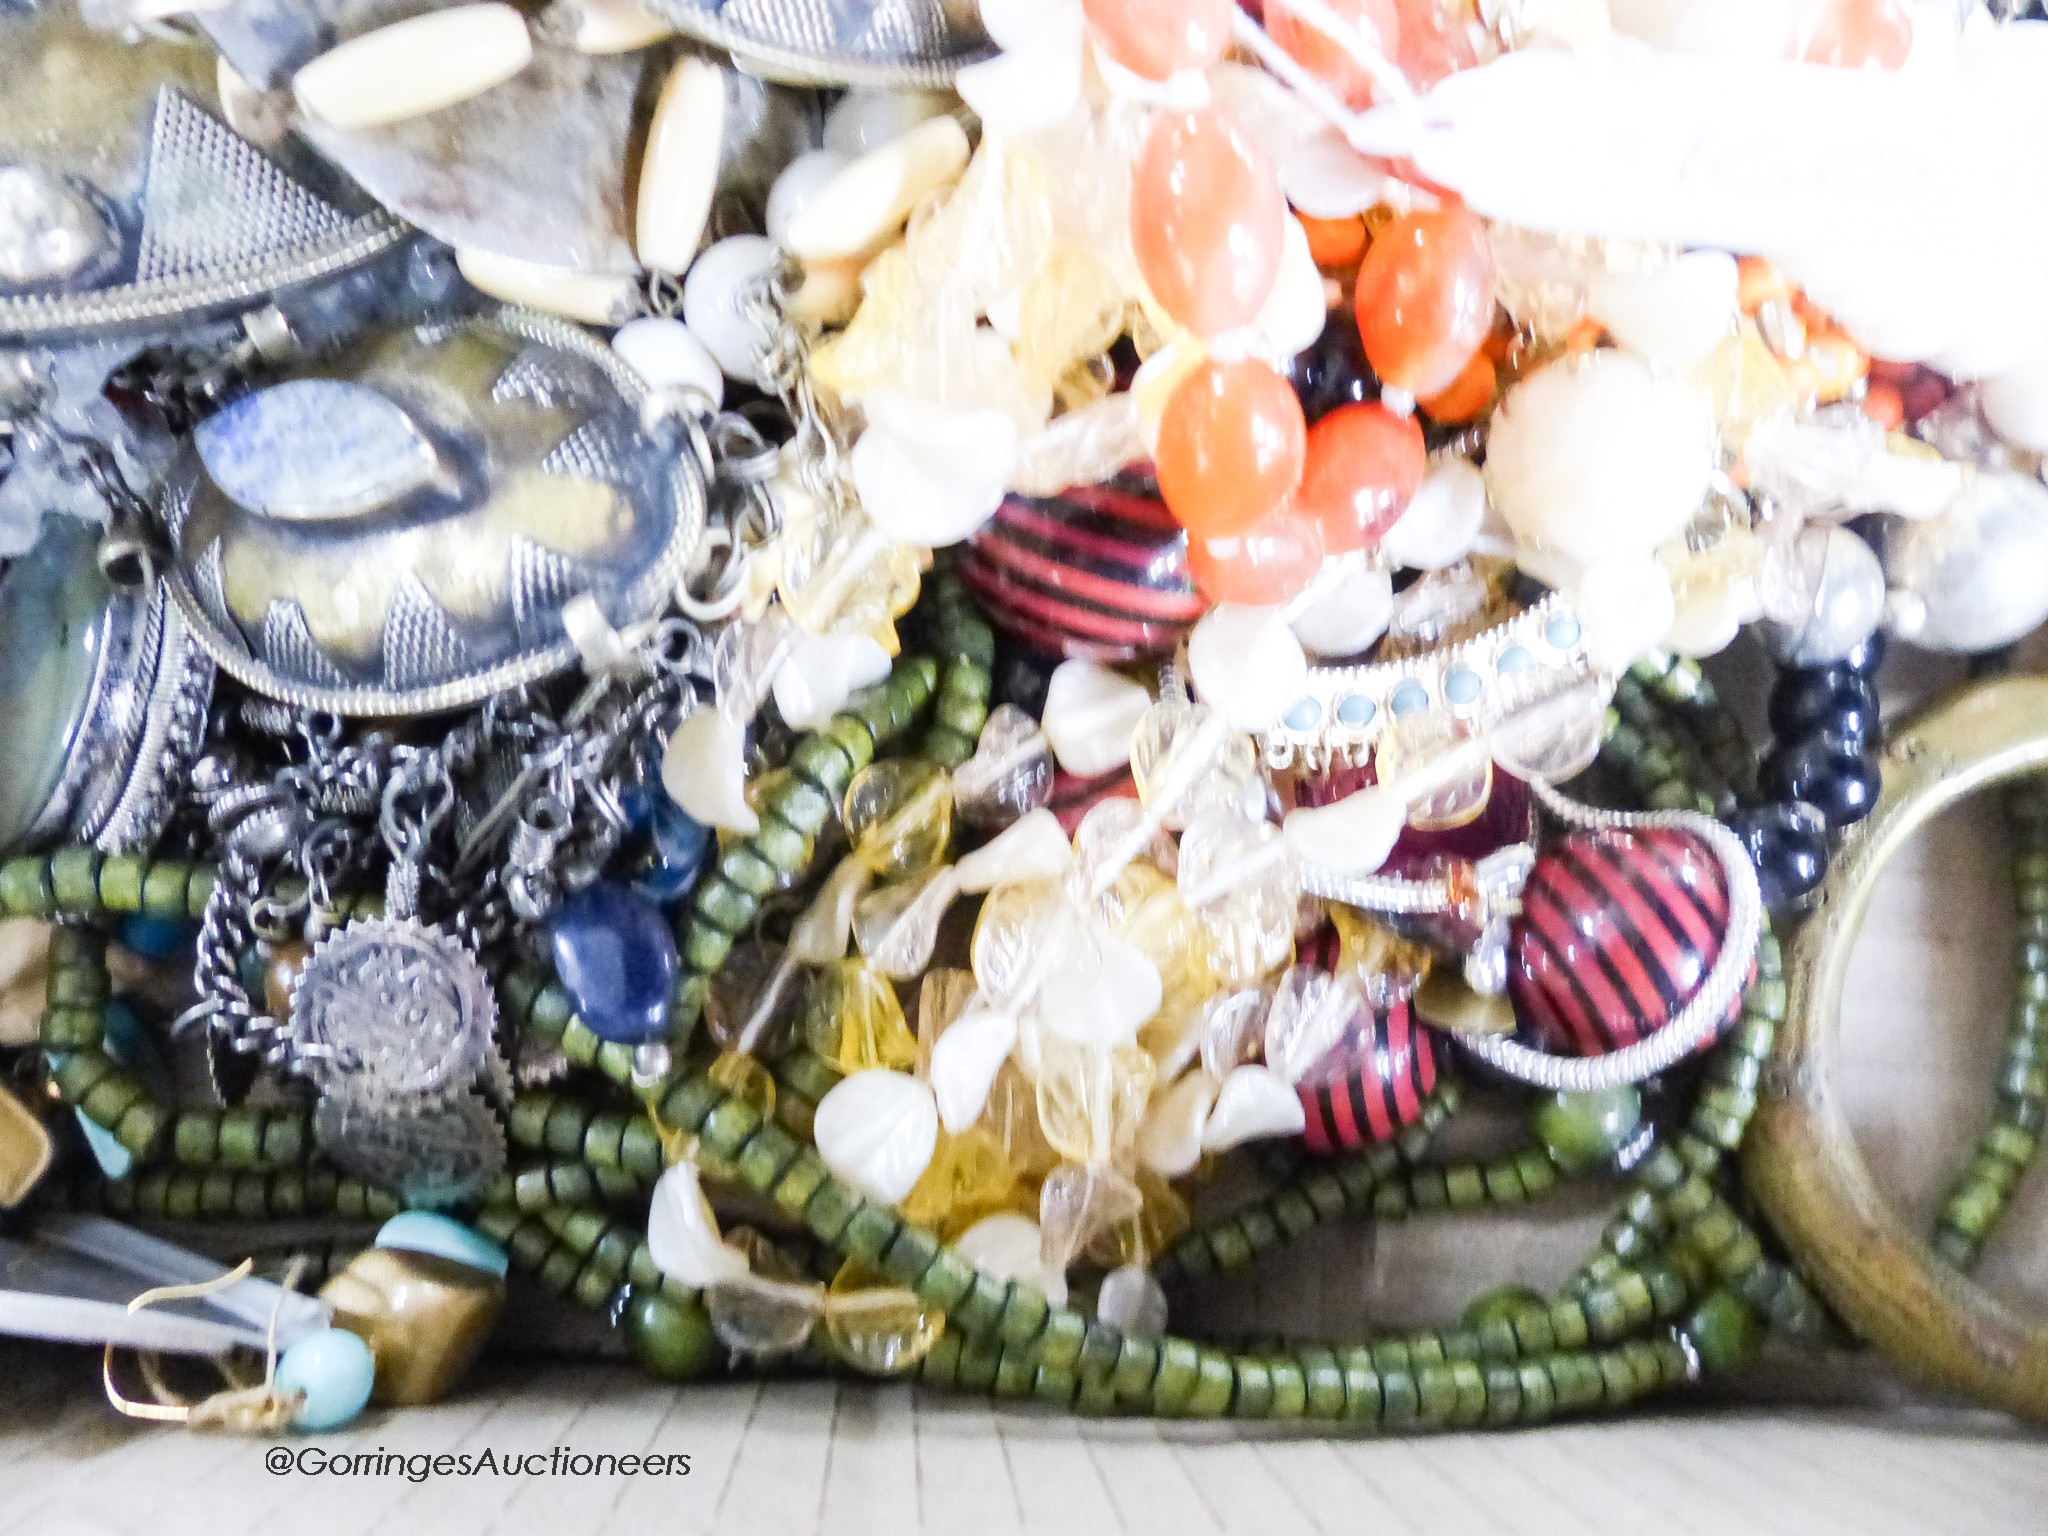 A mixed group of mainly costume jewellery including Venetian style glass heart pendant, agate bead necklace etc.